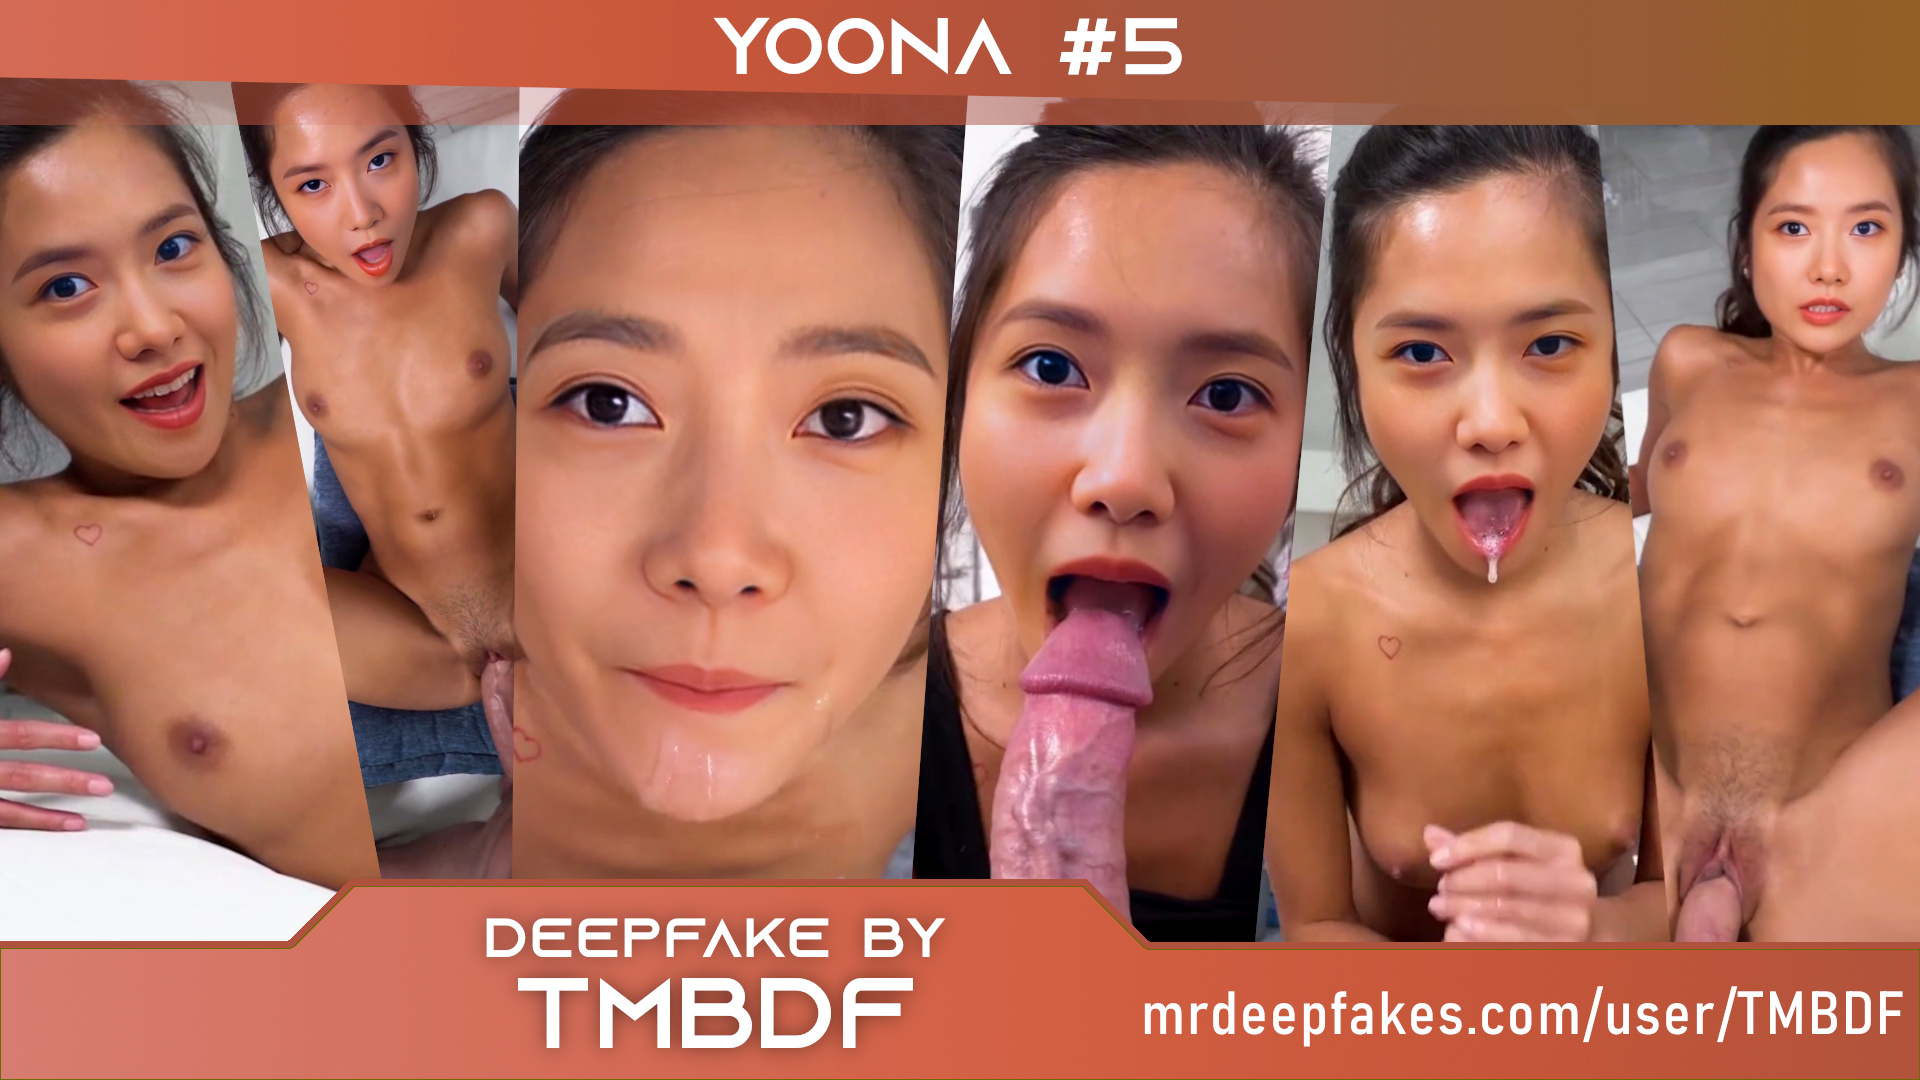 POV sex with tanned Yoona lookalike #5 - paid commission